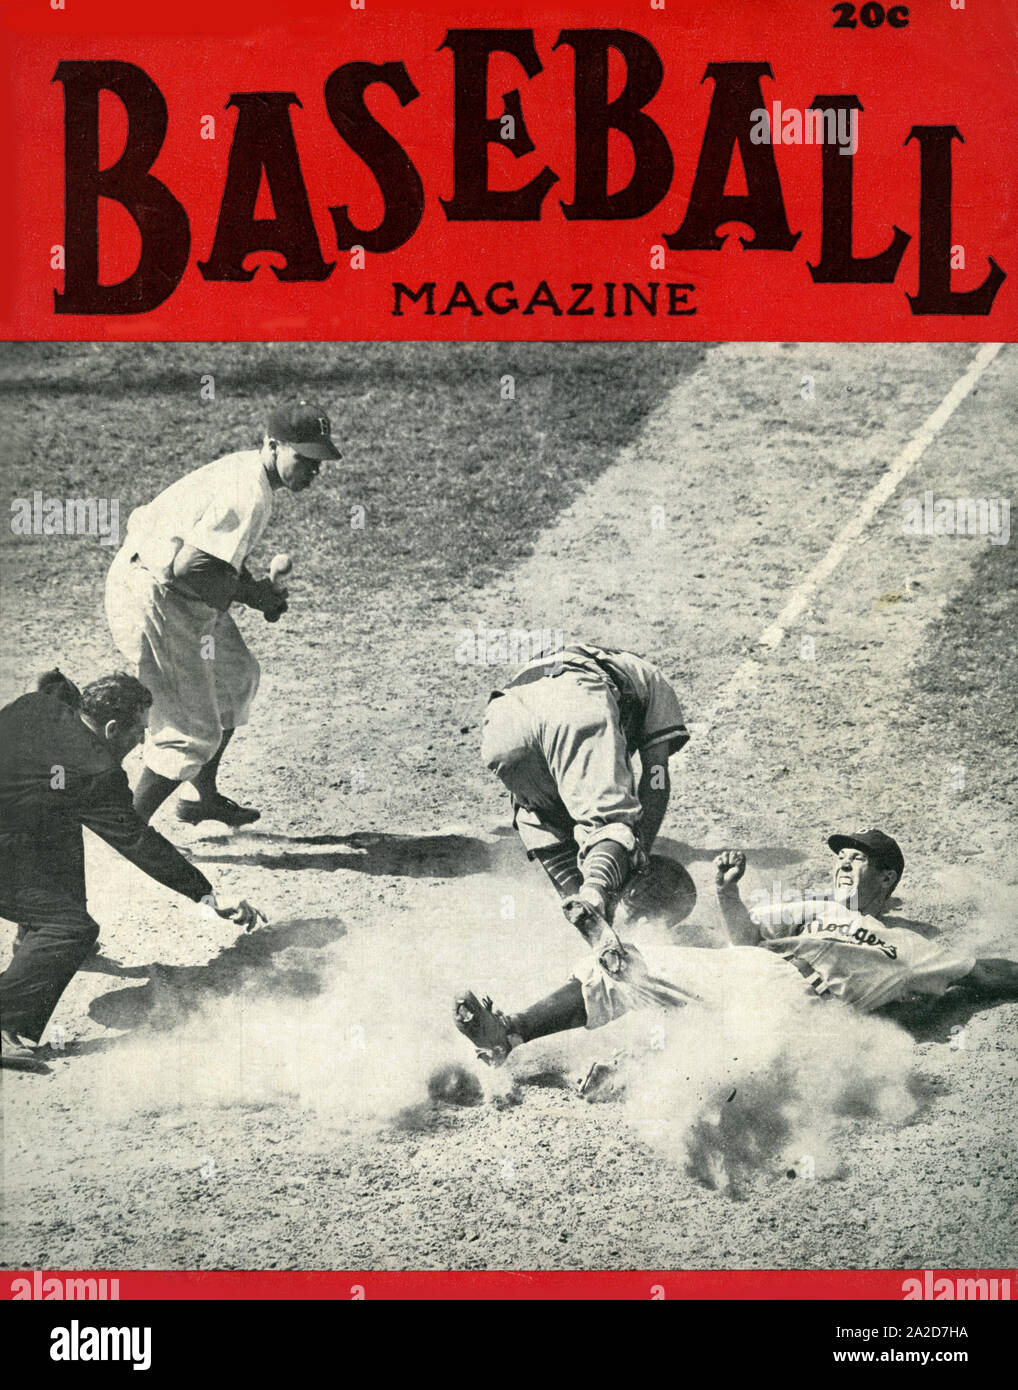 Vintage Baseball Magazine cover from the 1940s depicting Brooklyn Dodgers player Pete Reiser sliding into home plate on a close play. Stock Photo